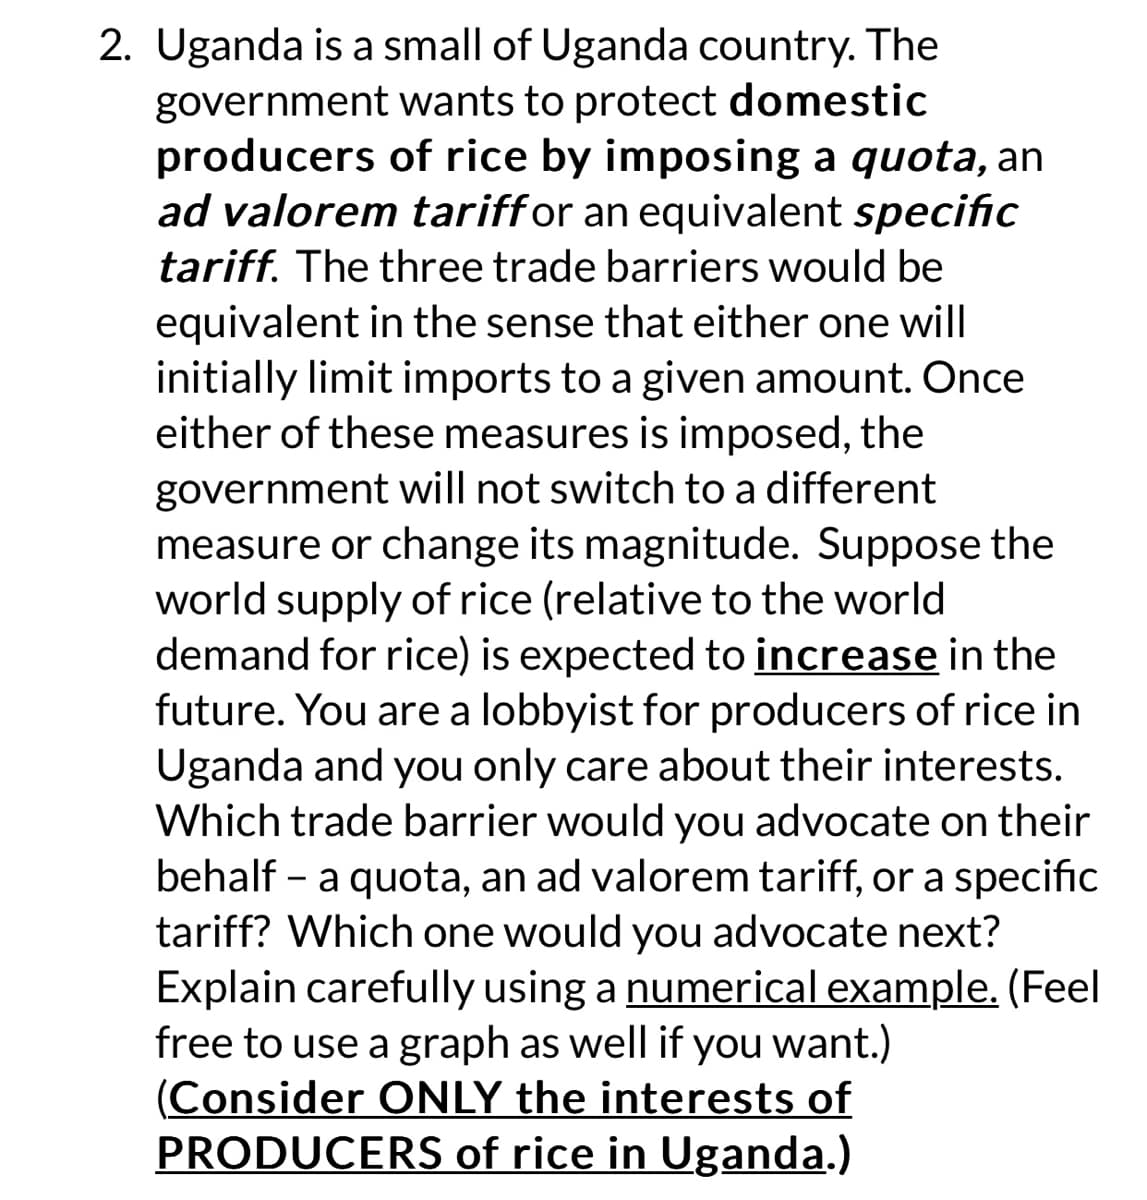 2. Uganda is a small of Uganda country. The
government wants to protect domestic
producers of rice by imposing a quota, an
ad valorem tariff or an equivalent specific
tariff. The three trade barriers would be
equivalent in the sense that either one will
initially limit imports to a given amount. Once
either of these measures is imposed, the
government will not switch to a different
measure or change its magnitude. Suppose the
world supply of rice (relative to the world
demand for rice) is expected to increase in the
future. You are a lobbyist for producers of rice in
Uganda and you only care about their interests.
Which trade barrier would you advocate on their
behalf - a quota, an ad valorem tariff, or a specific
tariff? Which one would you advocate next?
Explain carefully using a numerical example. (Feel
free to use a graph as well if you want.)
(Consider ONLY the interests of
PRODUCERS of rice in Uganda.)